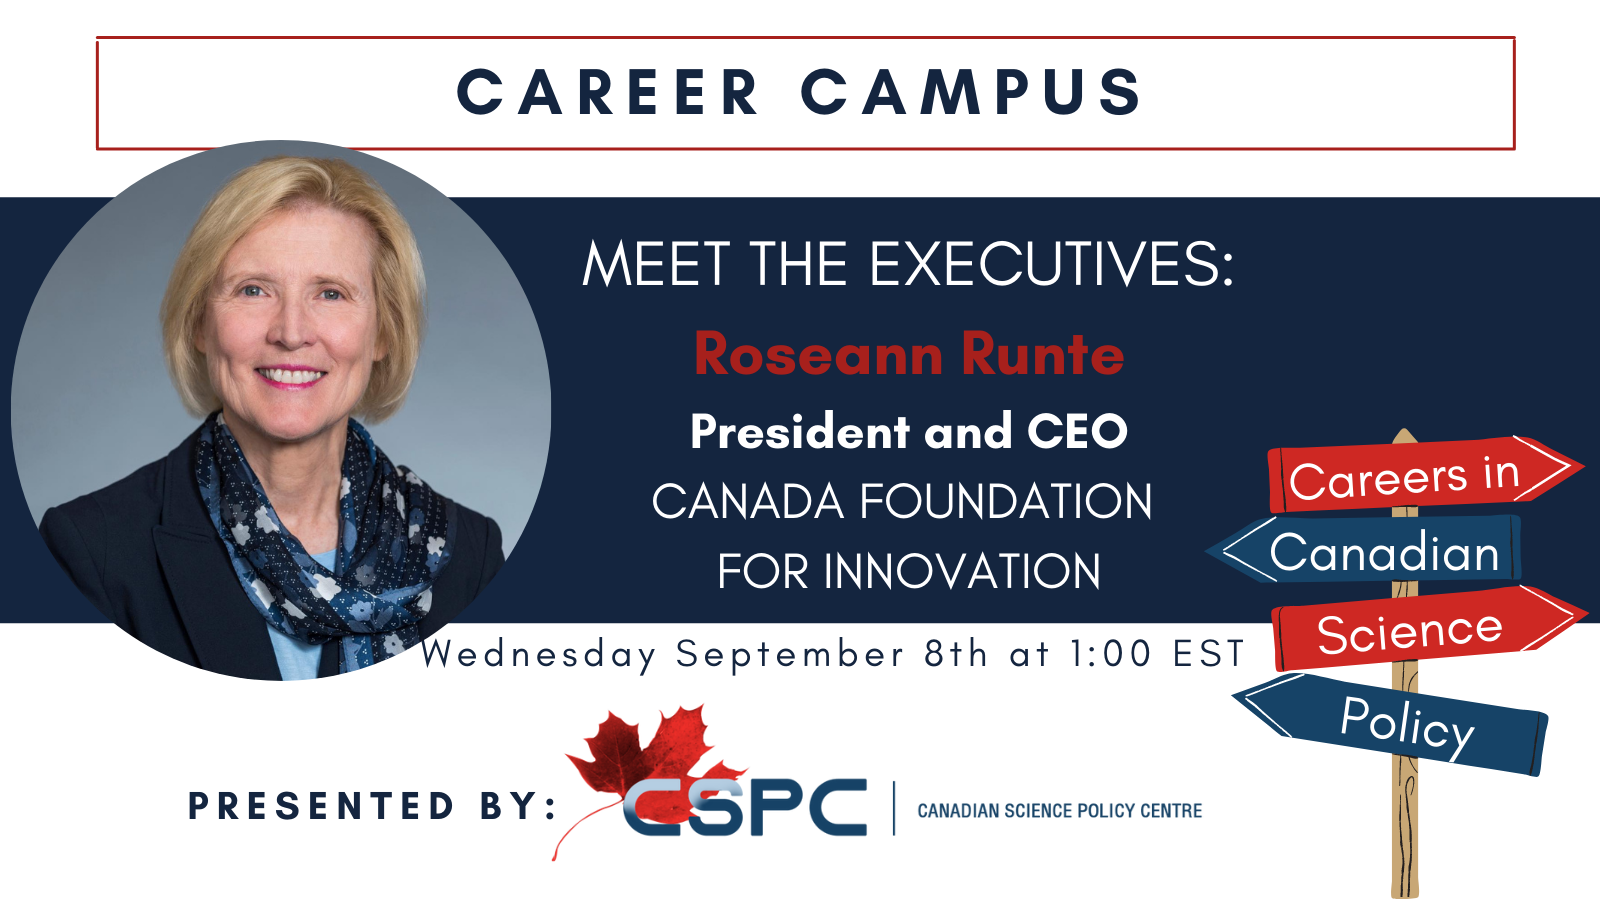 Banner for the Meet the Executives event with Rosann Runte, President and CEO of the Canada Foundation for Innovation